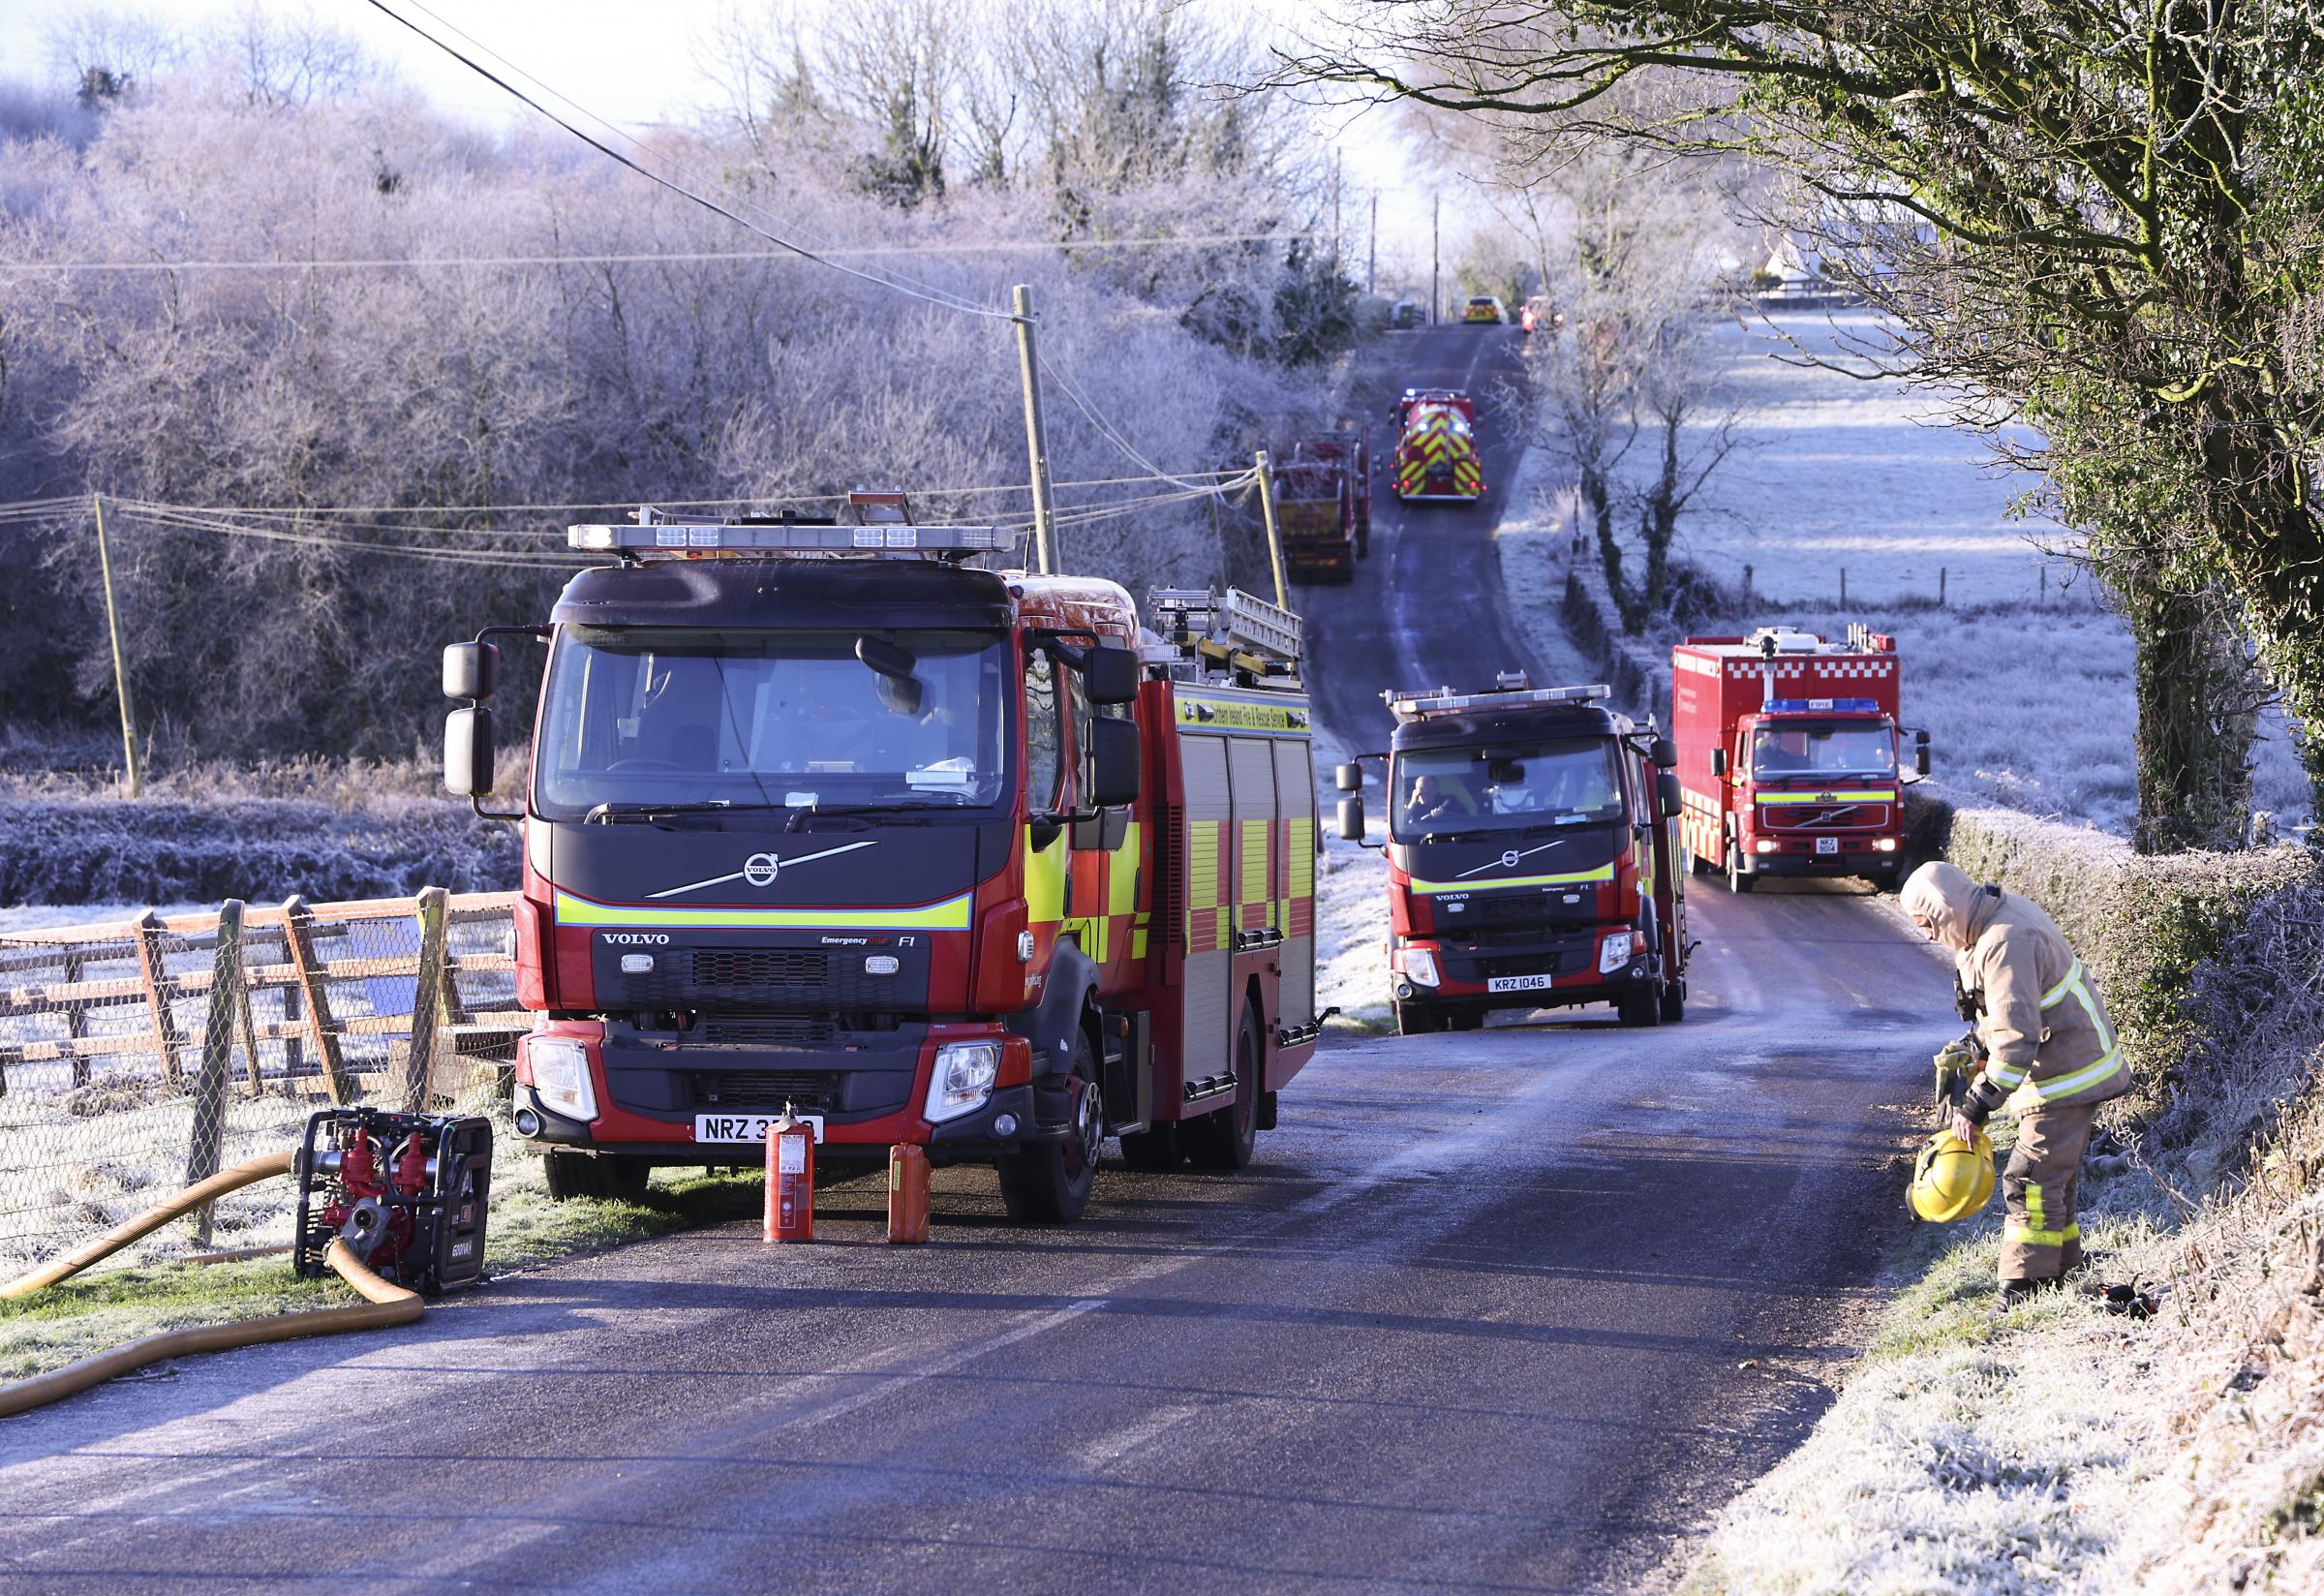 Emergency Services at a Fire at Skip Services, Largy Road Tempo, Enniskillen.